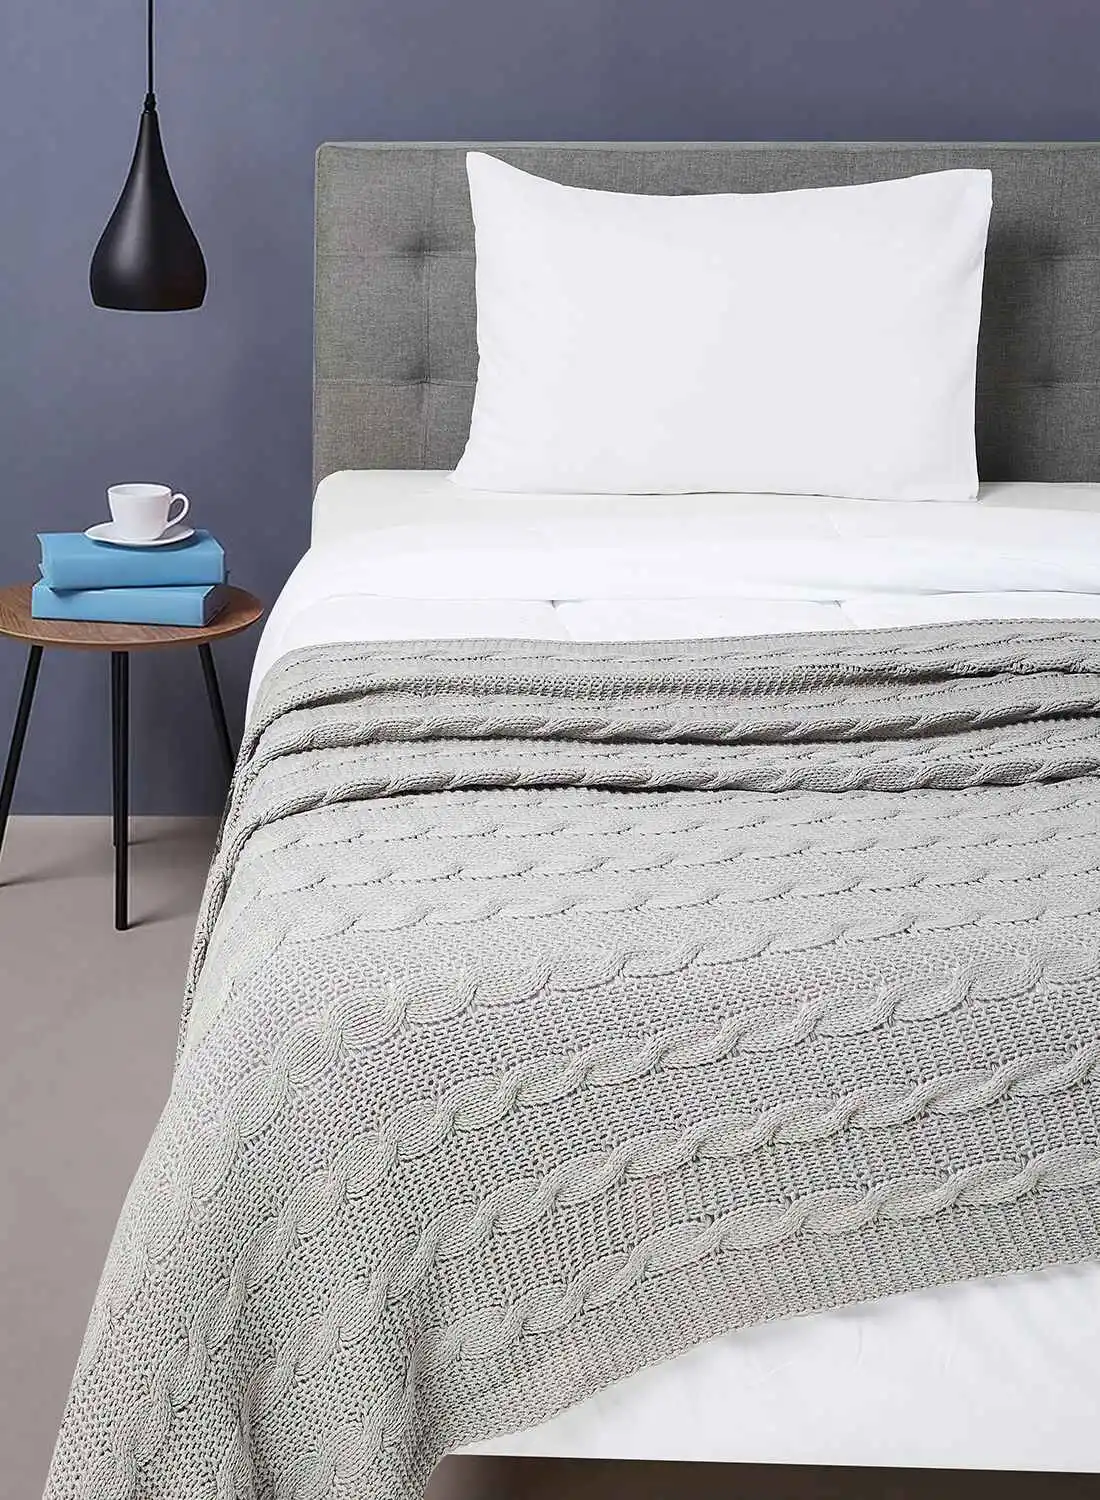 noon east Lightweight Summer Blanket Queen Size 400 GSM Soft Knitted All Season Blanket Bed And Sofa Throw 150x200 cms Grey